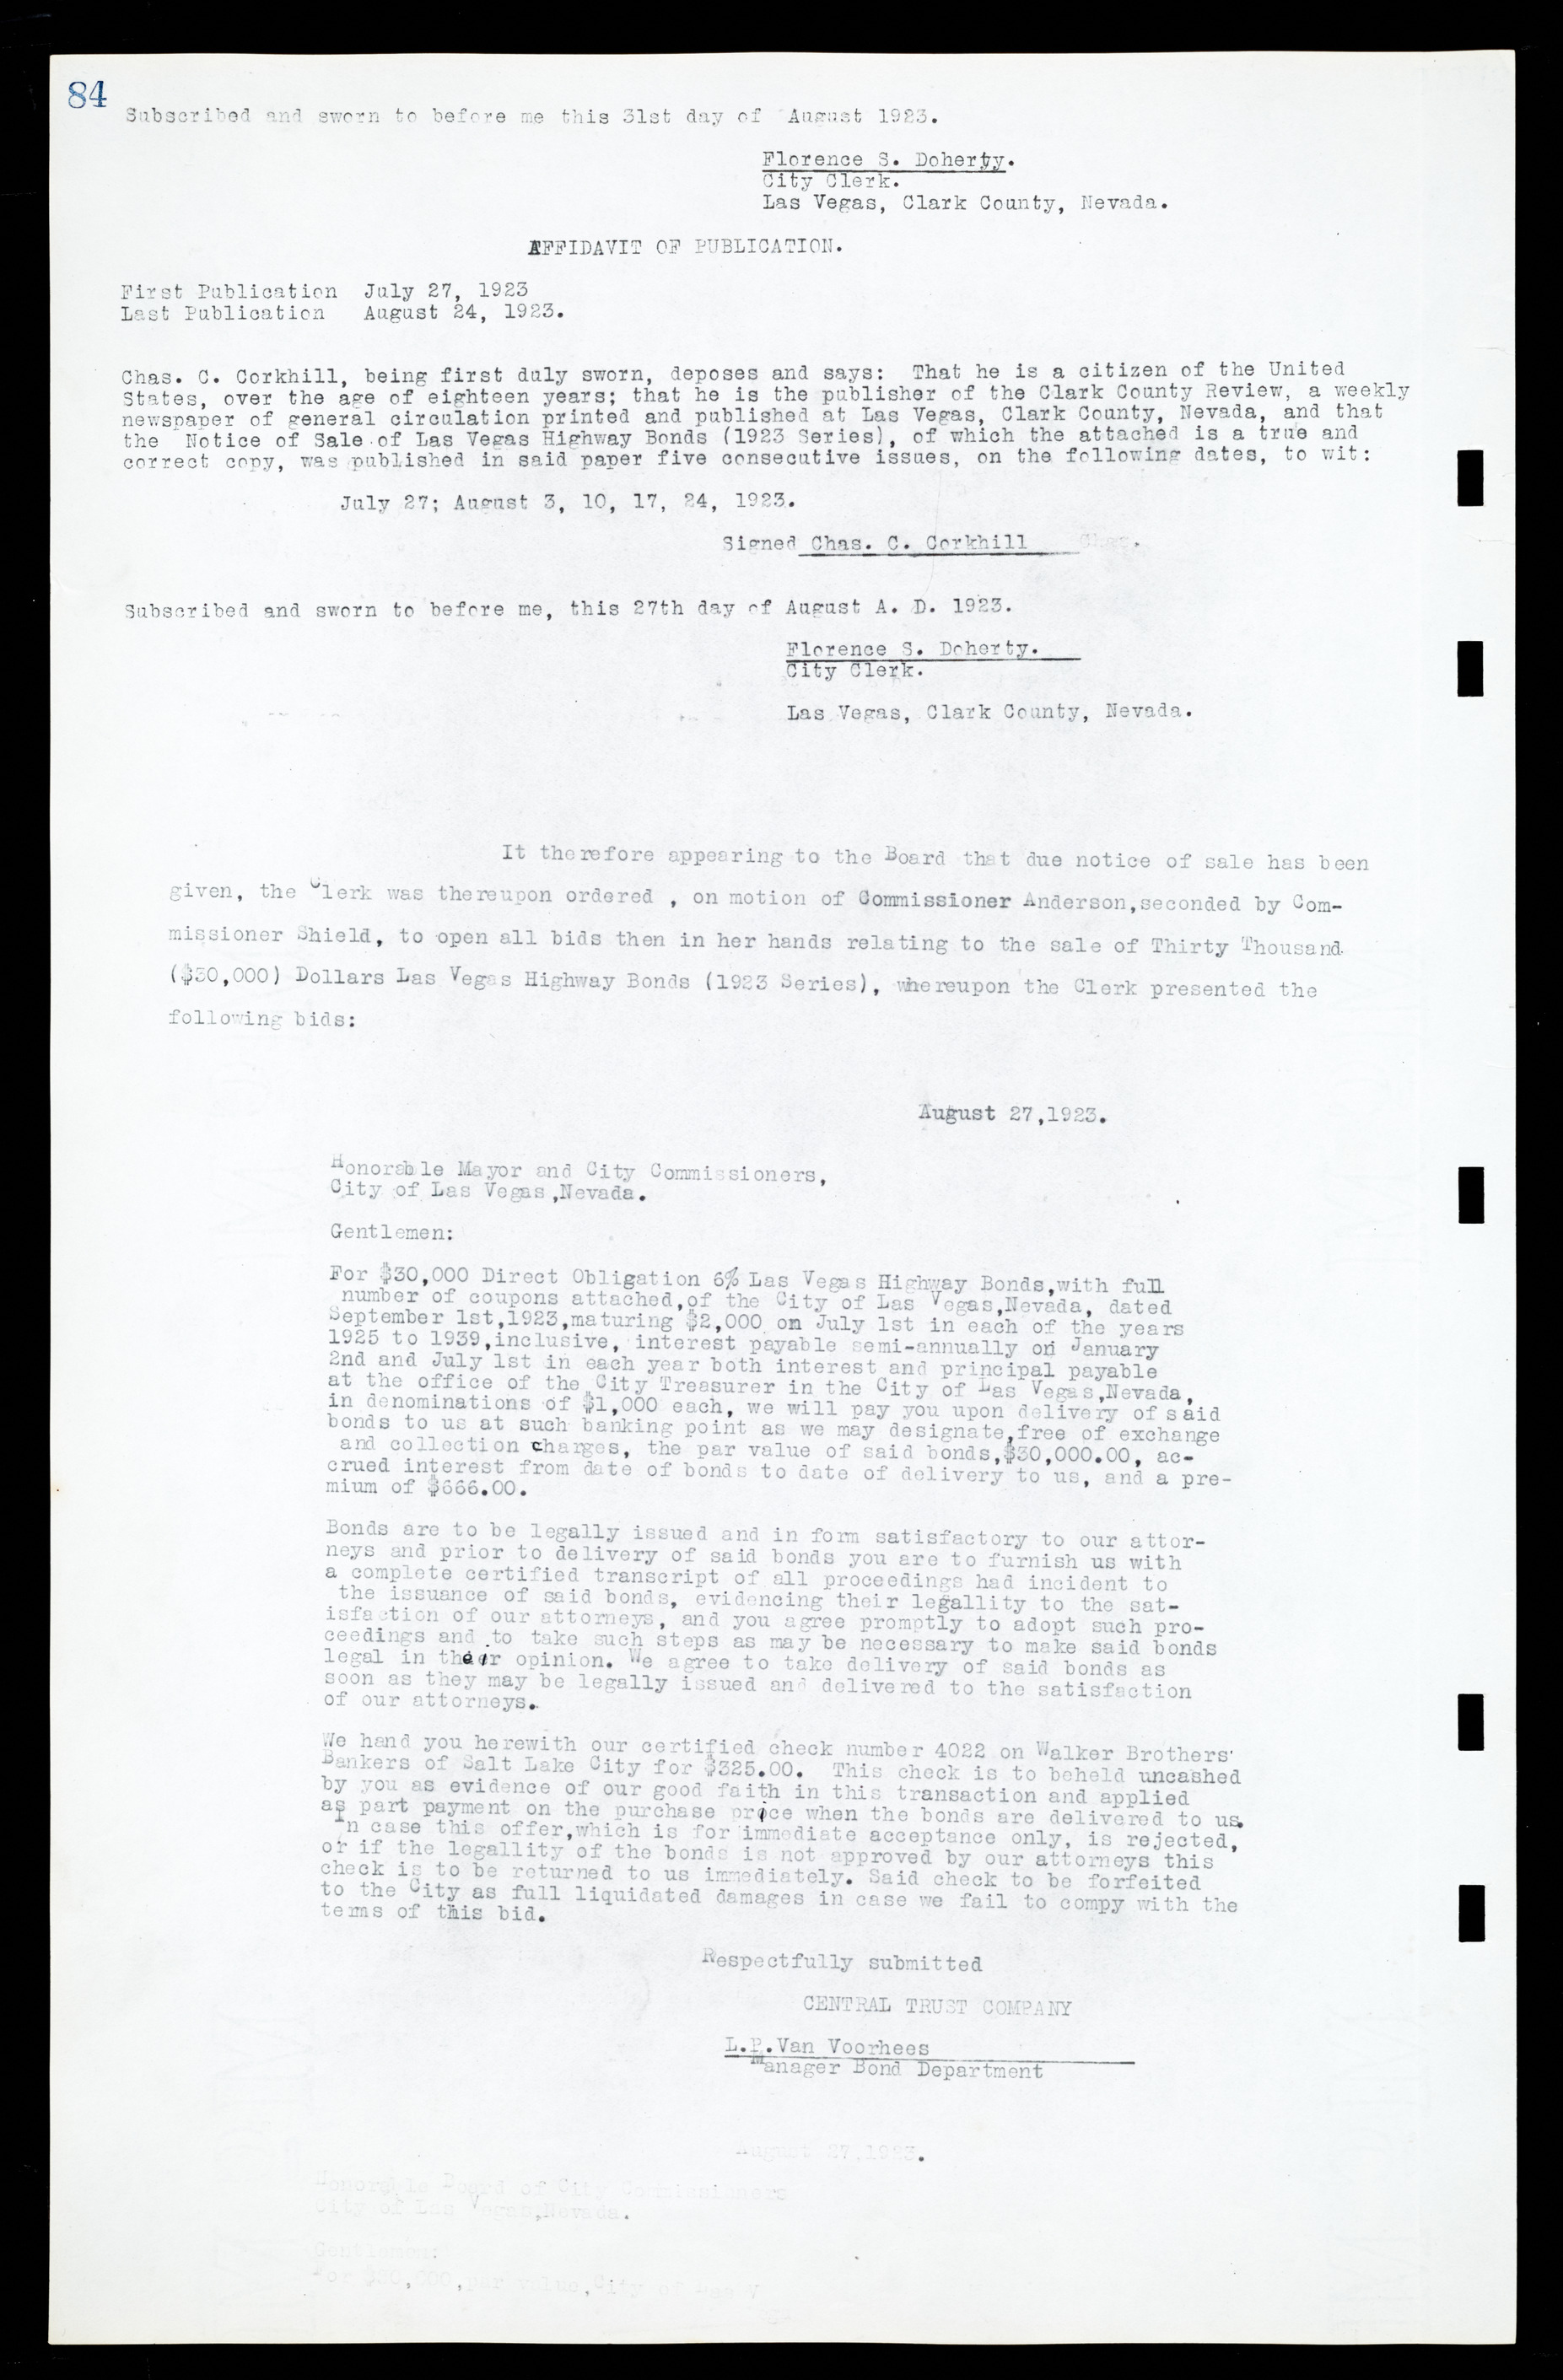 Las Vegas City Commission Minutes, March 1, 1922 to May 10, 1929, lvc000002-91